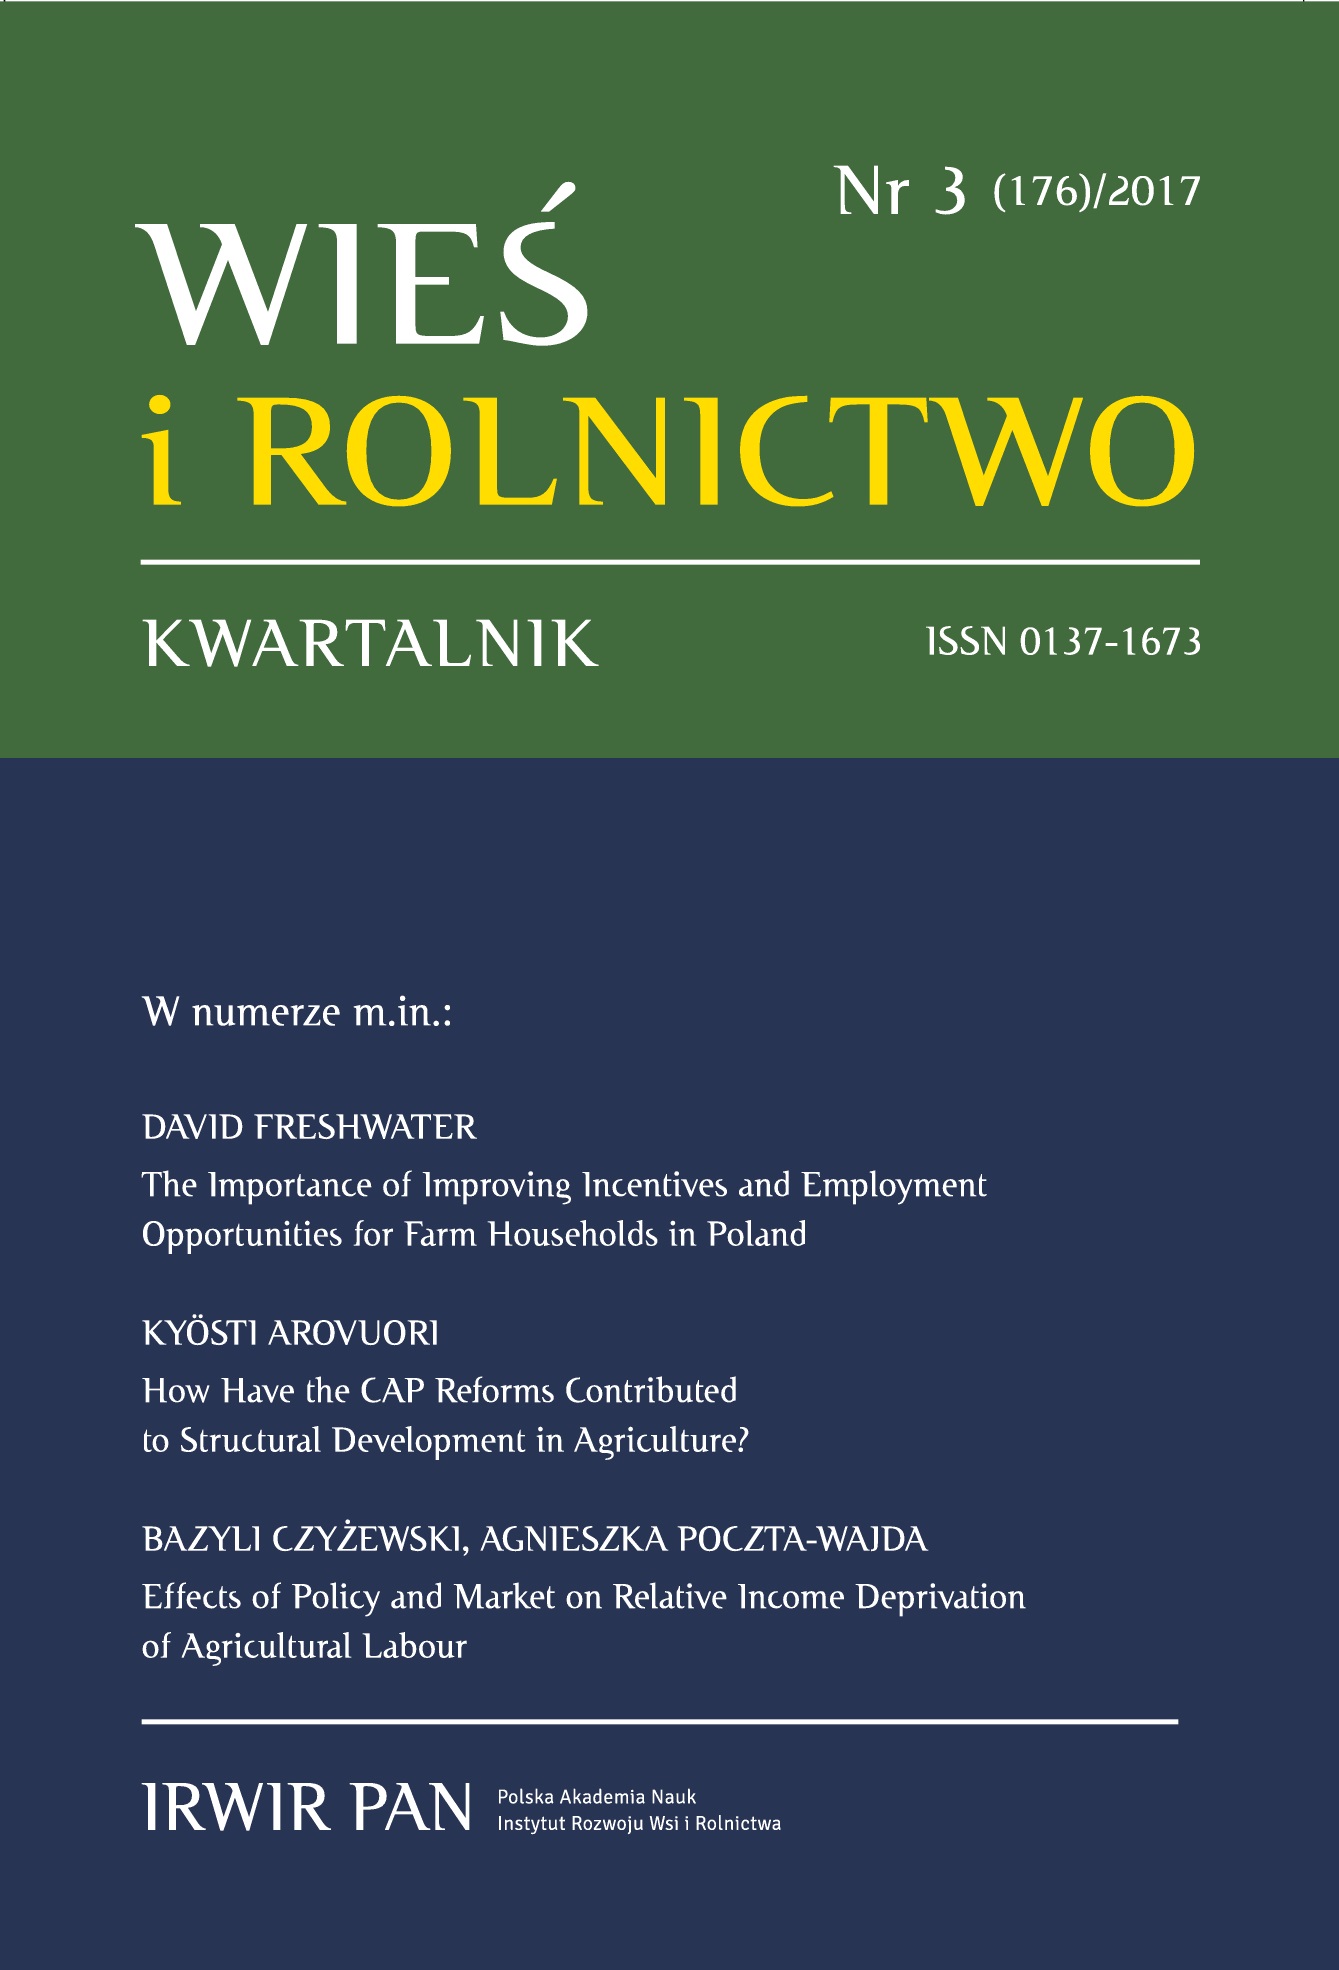 Renewable Energy – Implications for Agriculture and Rural Development in Poland Cover Image